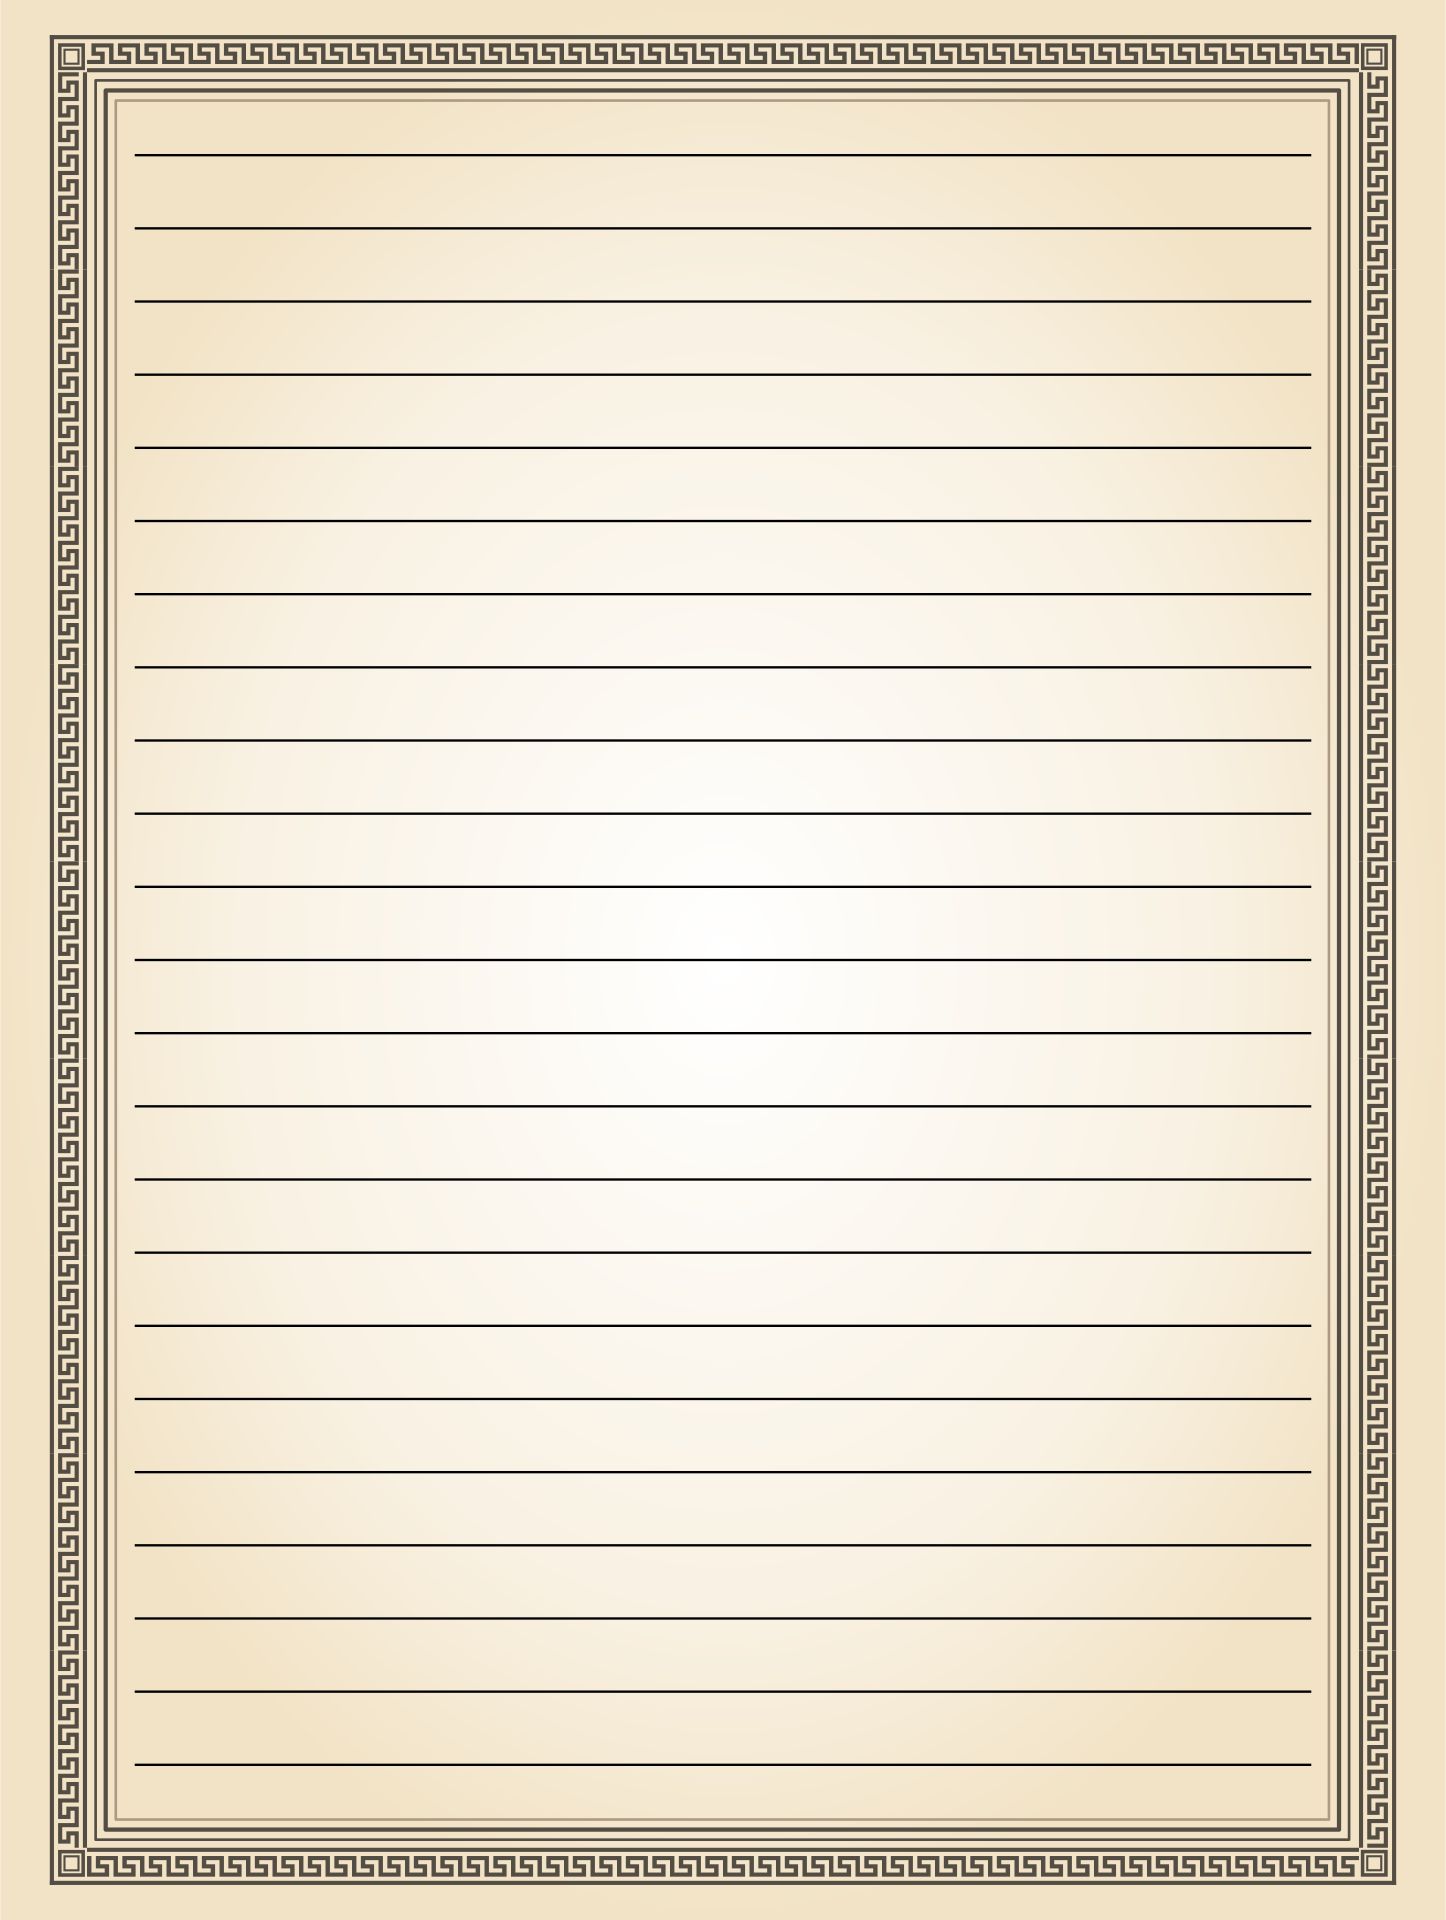 free-lined-paper-with-border-5-best-images-of-spring-writing-paper